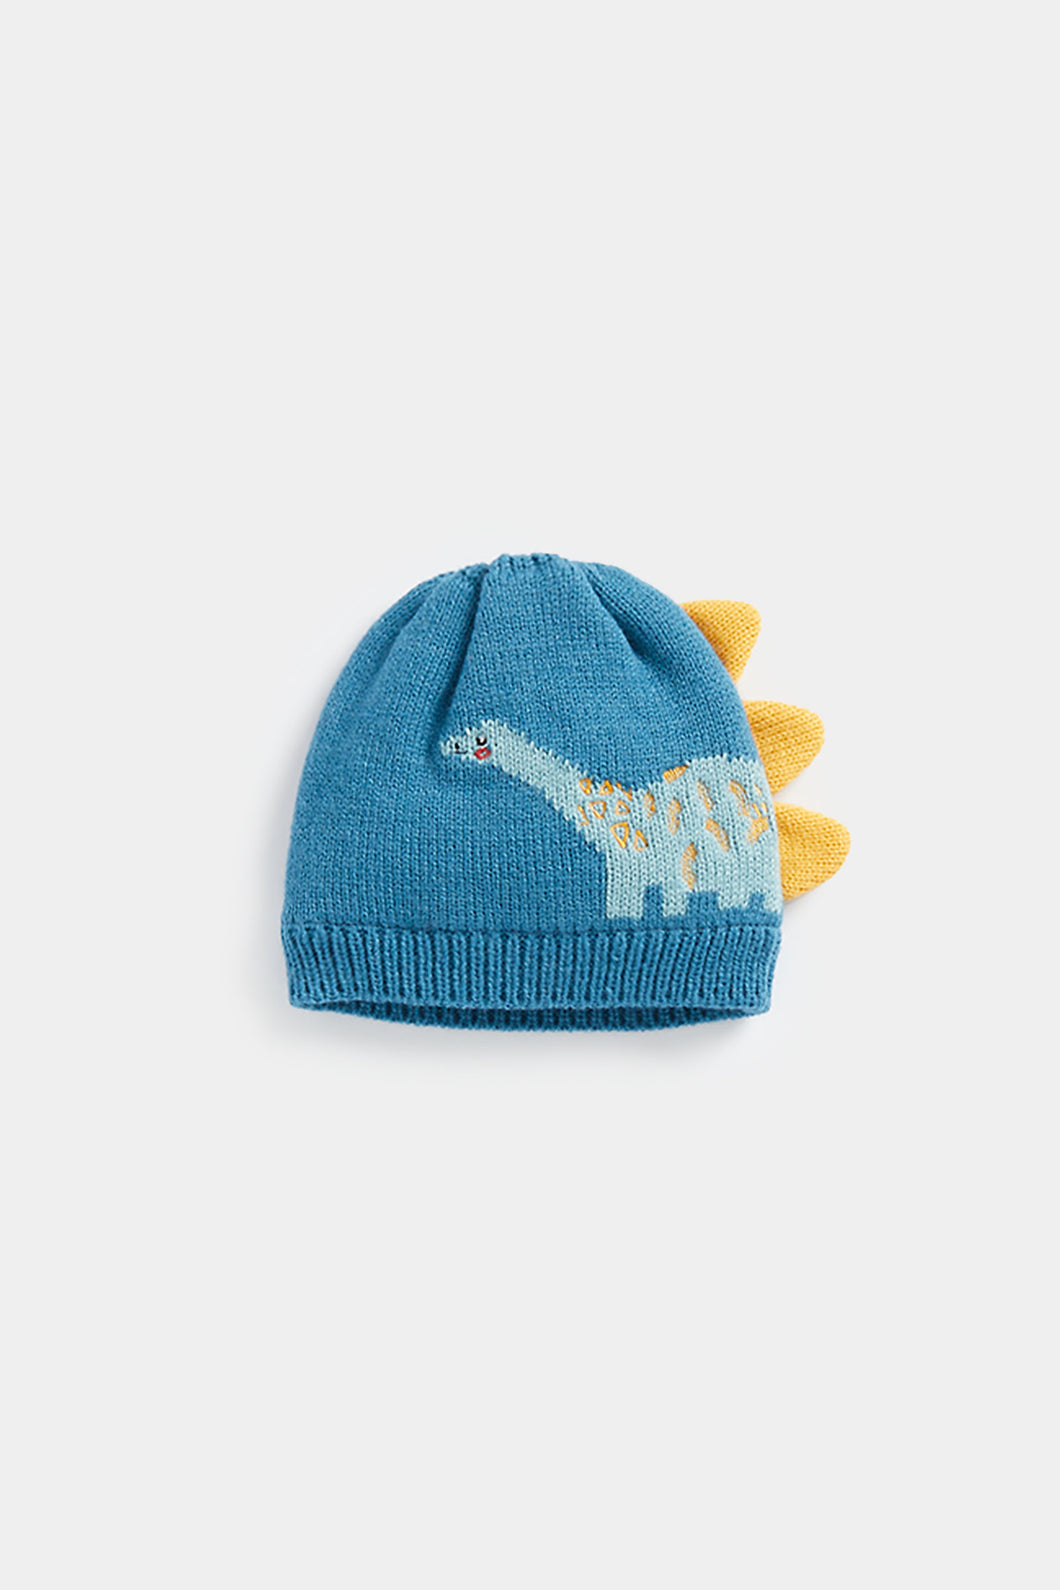 Mothercare Dinosaur Knitted Baby Hat